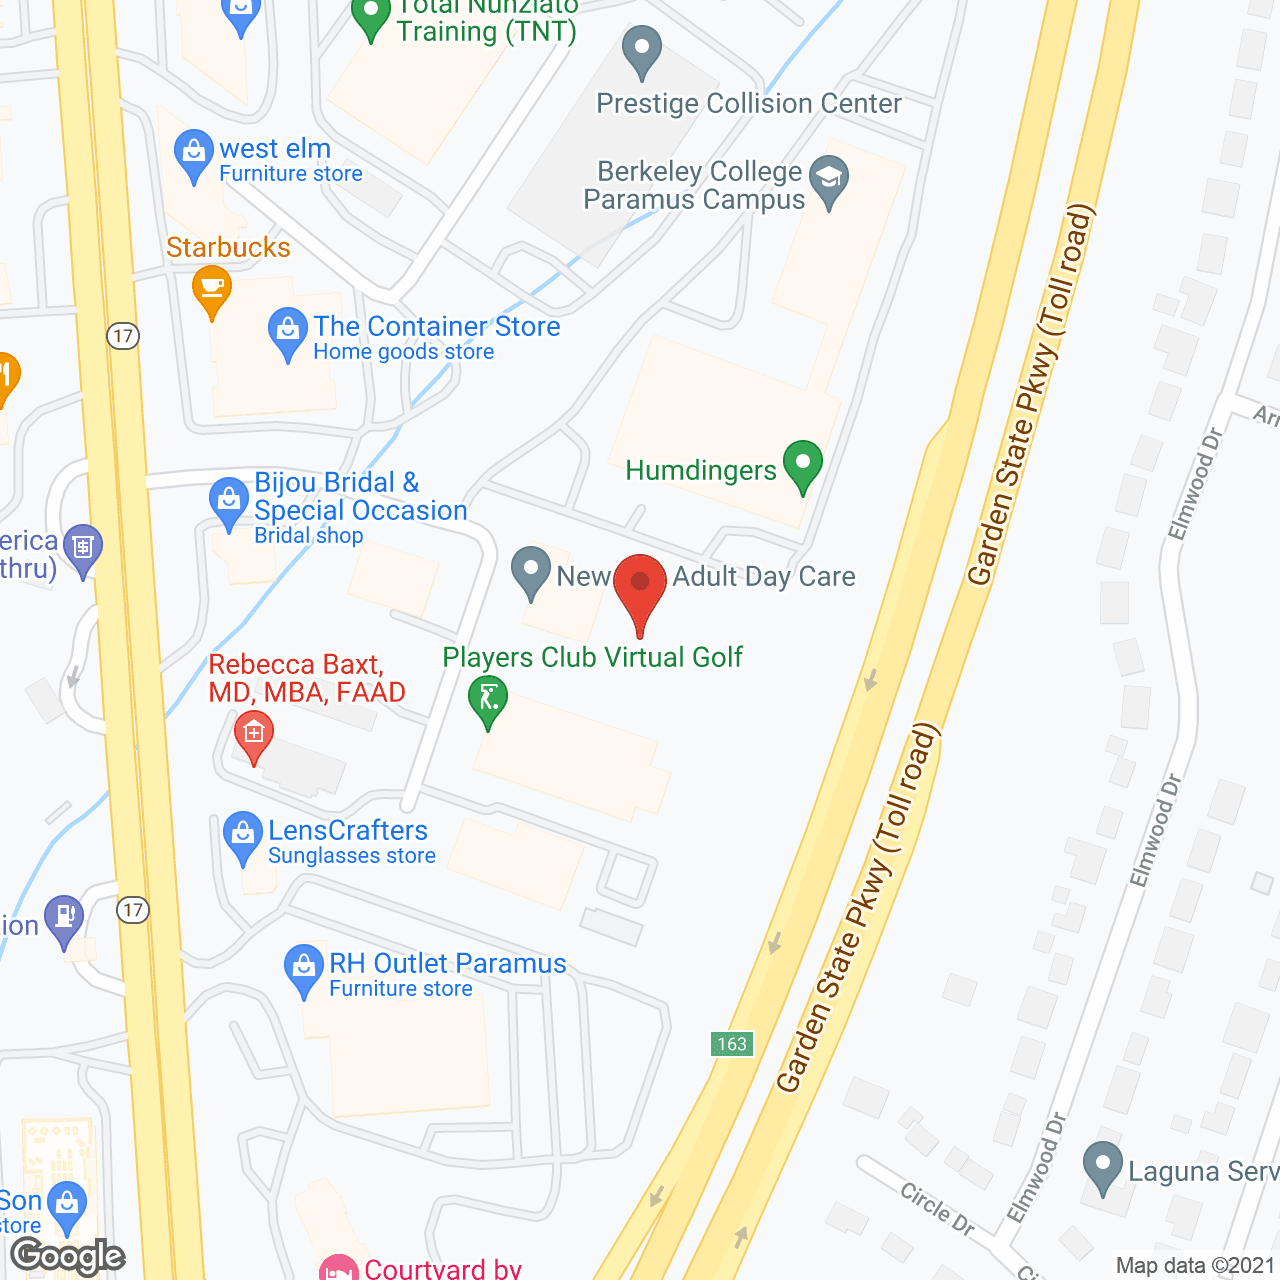 New Life Adult Day Care in google map